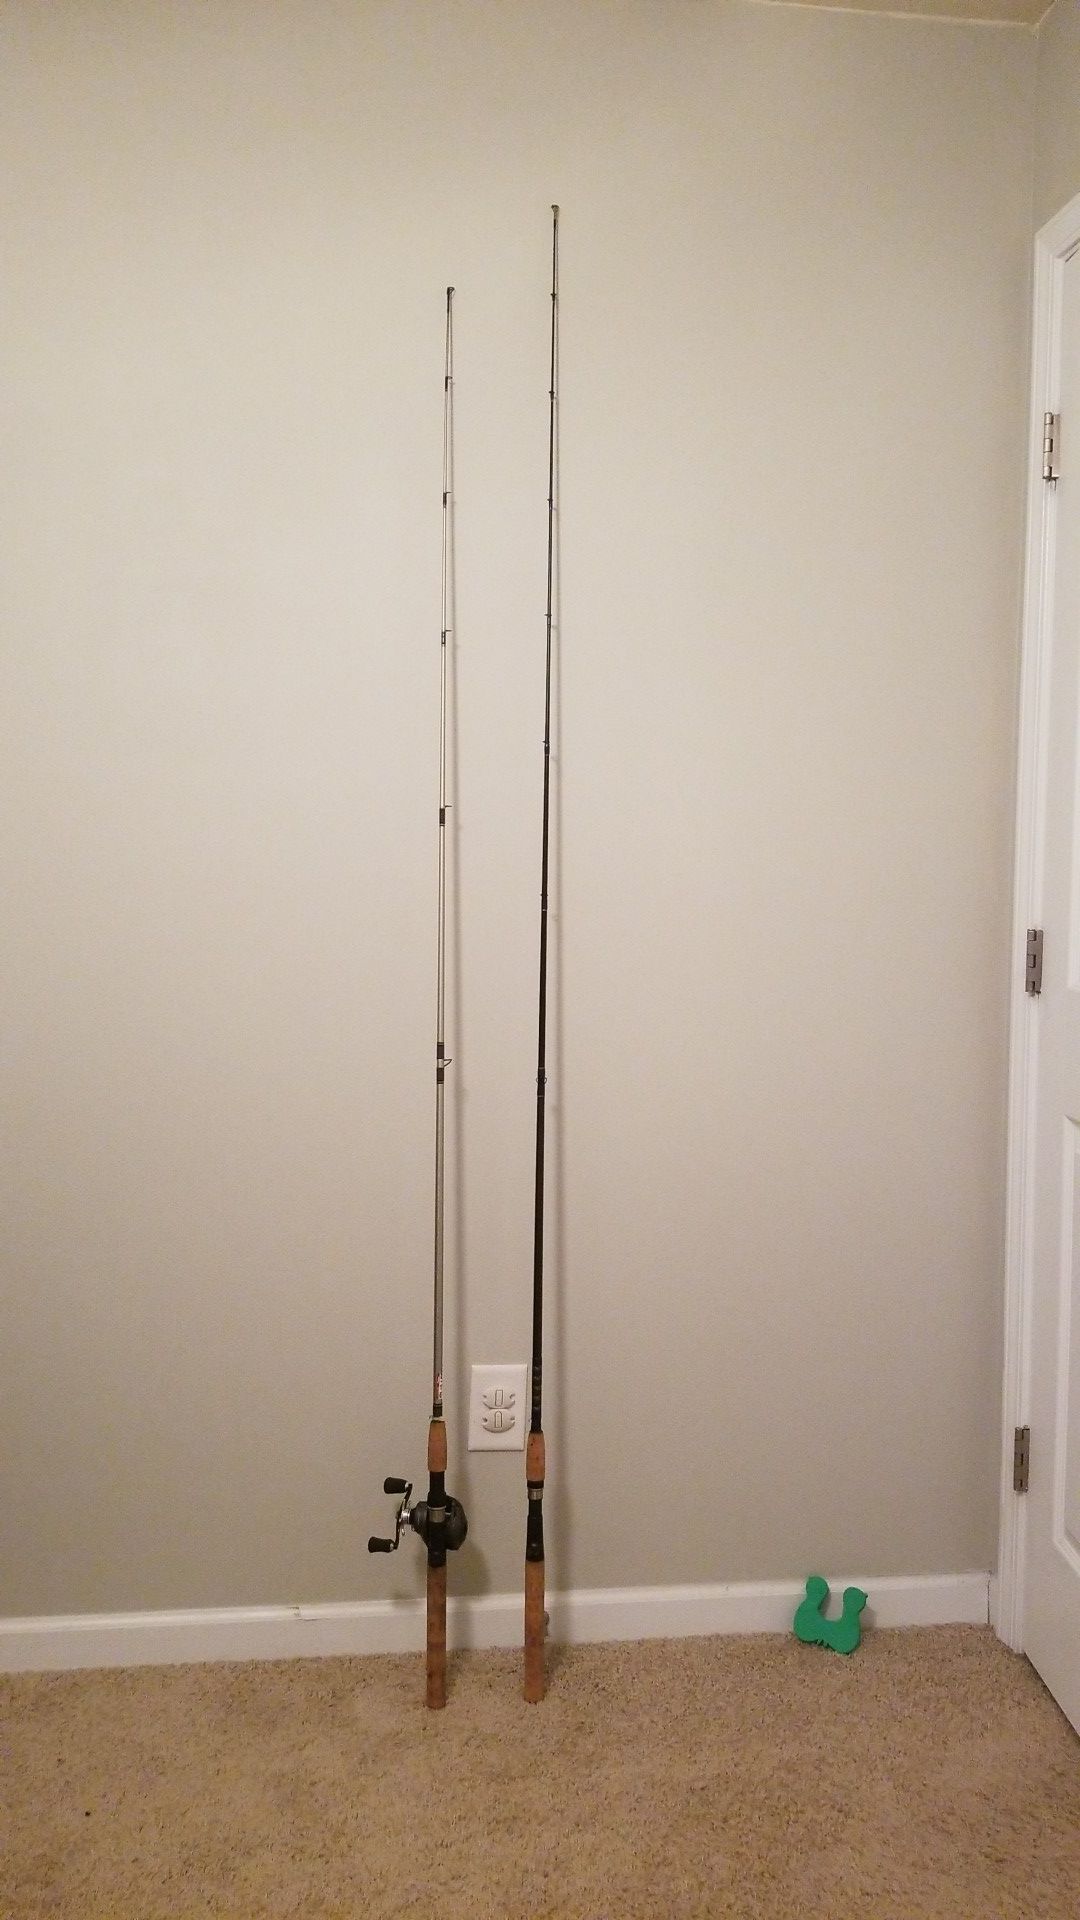 2 baitcasting rods with 1 reel